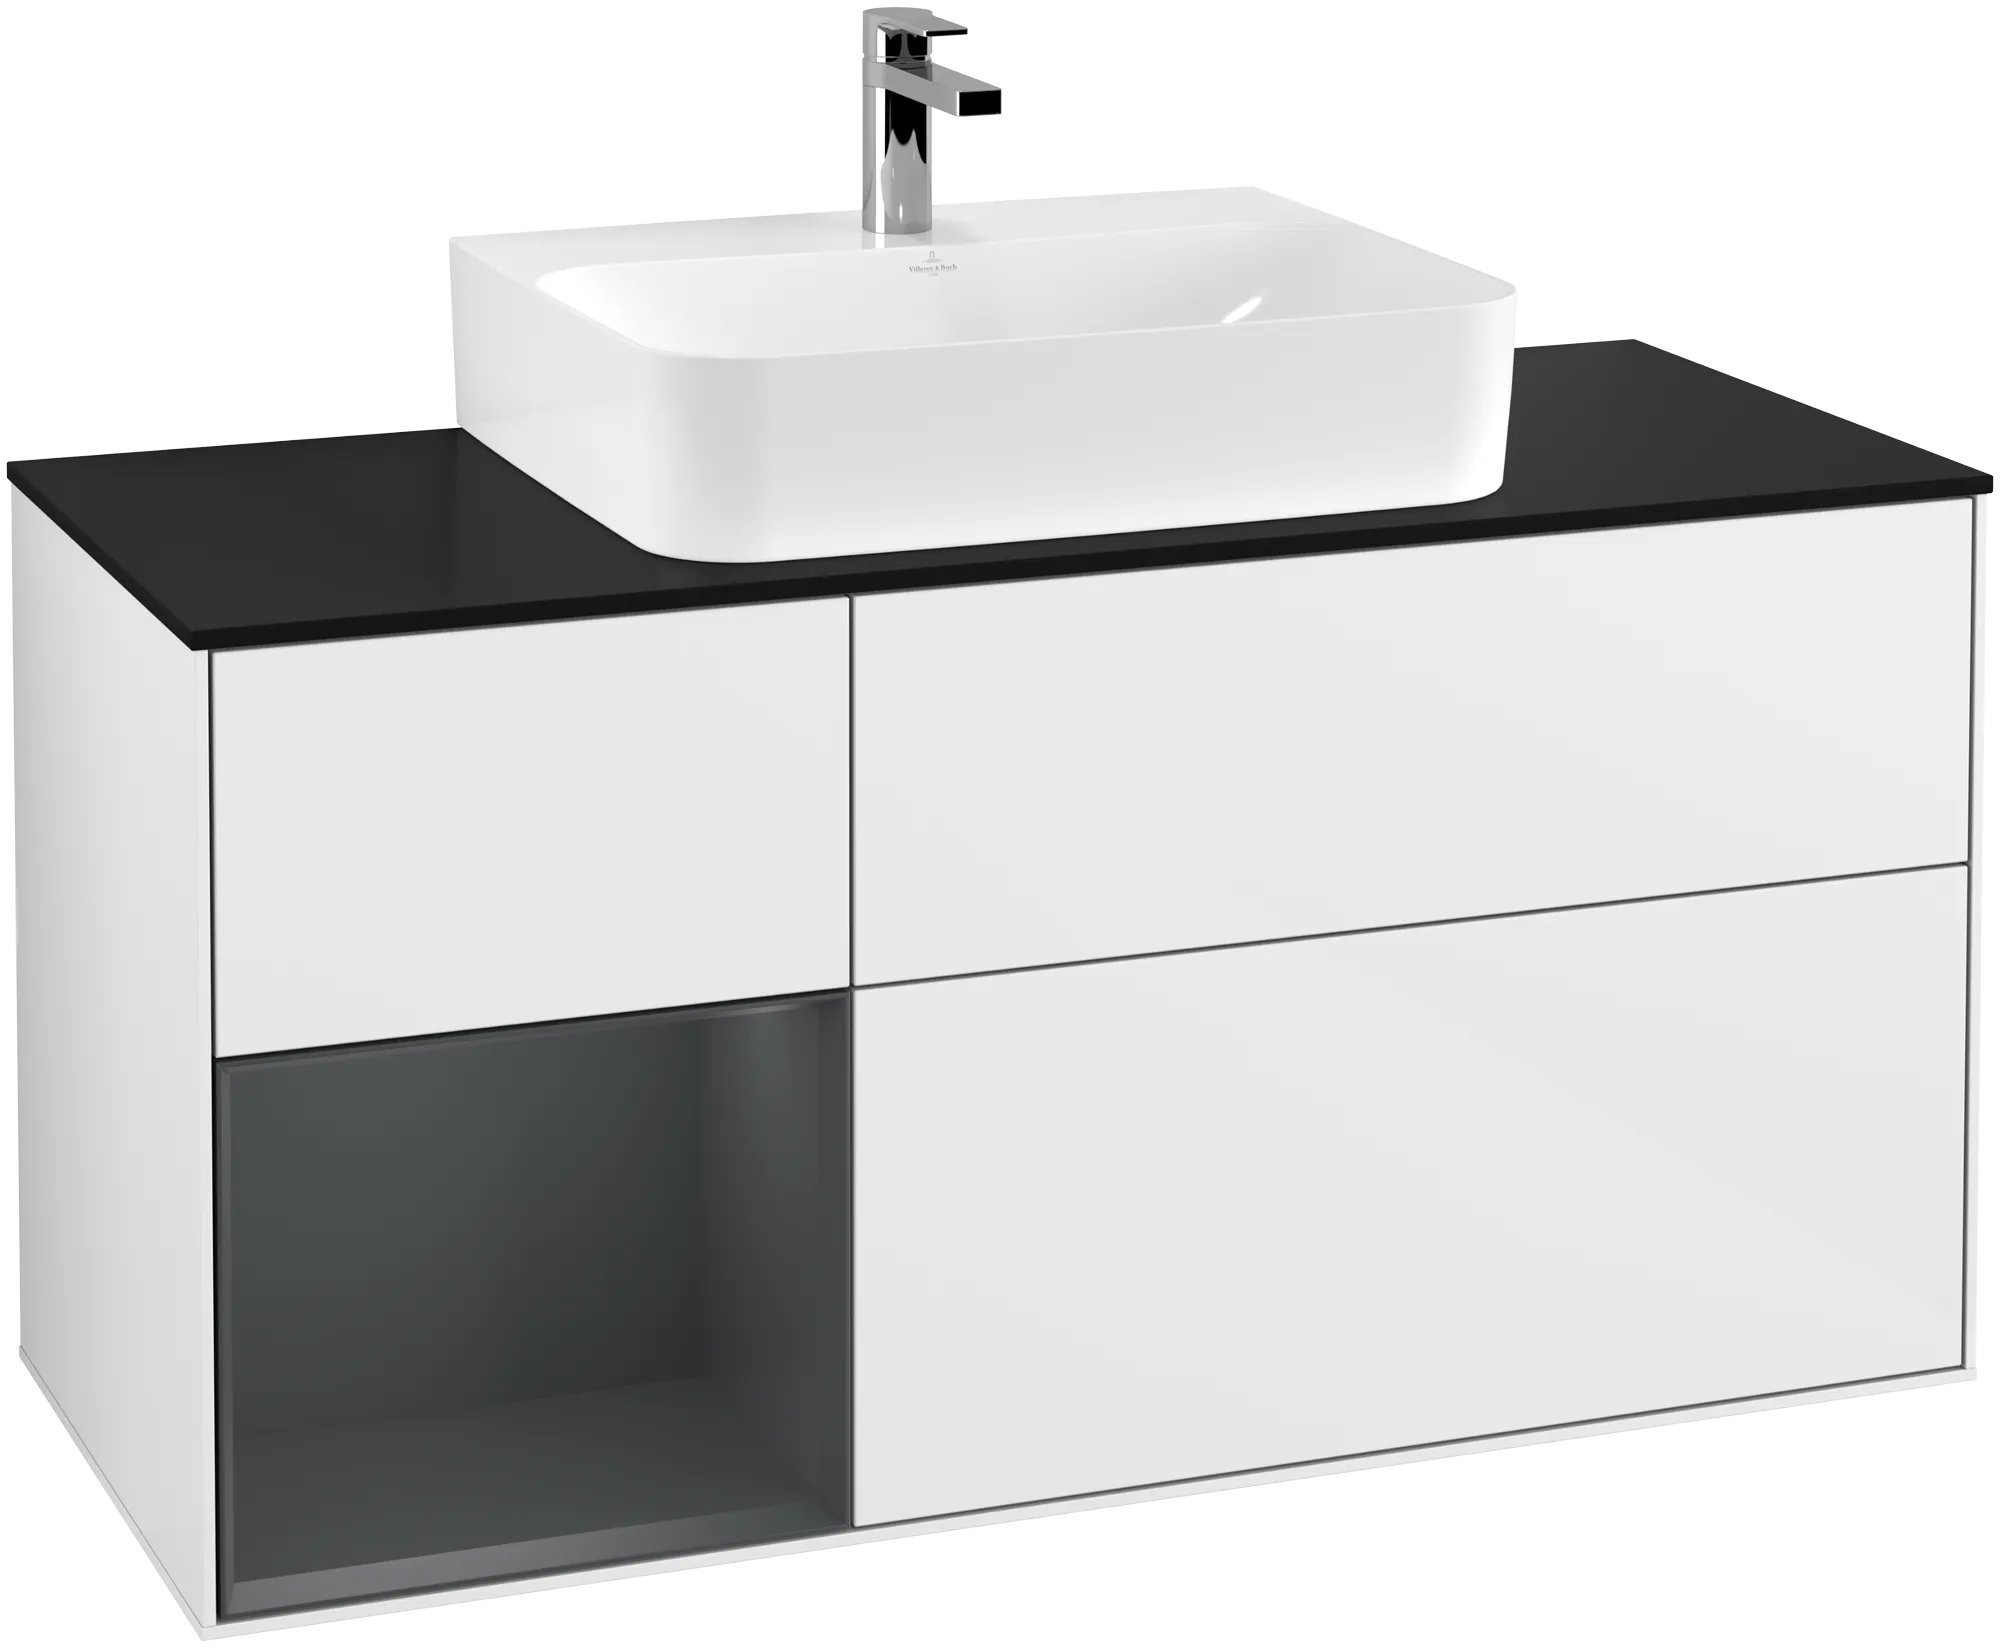 Picture of VILLEROY BOCH Finion Vanity unit, with lighting, 3 pull-out compartments, 1200 x 603 x 501 mm, Glossy White Lacquer / Midnight Blue Matt Lacquer / Glass Black Matt #G162HGGF